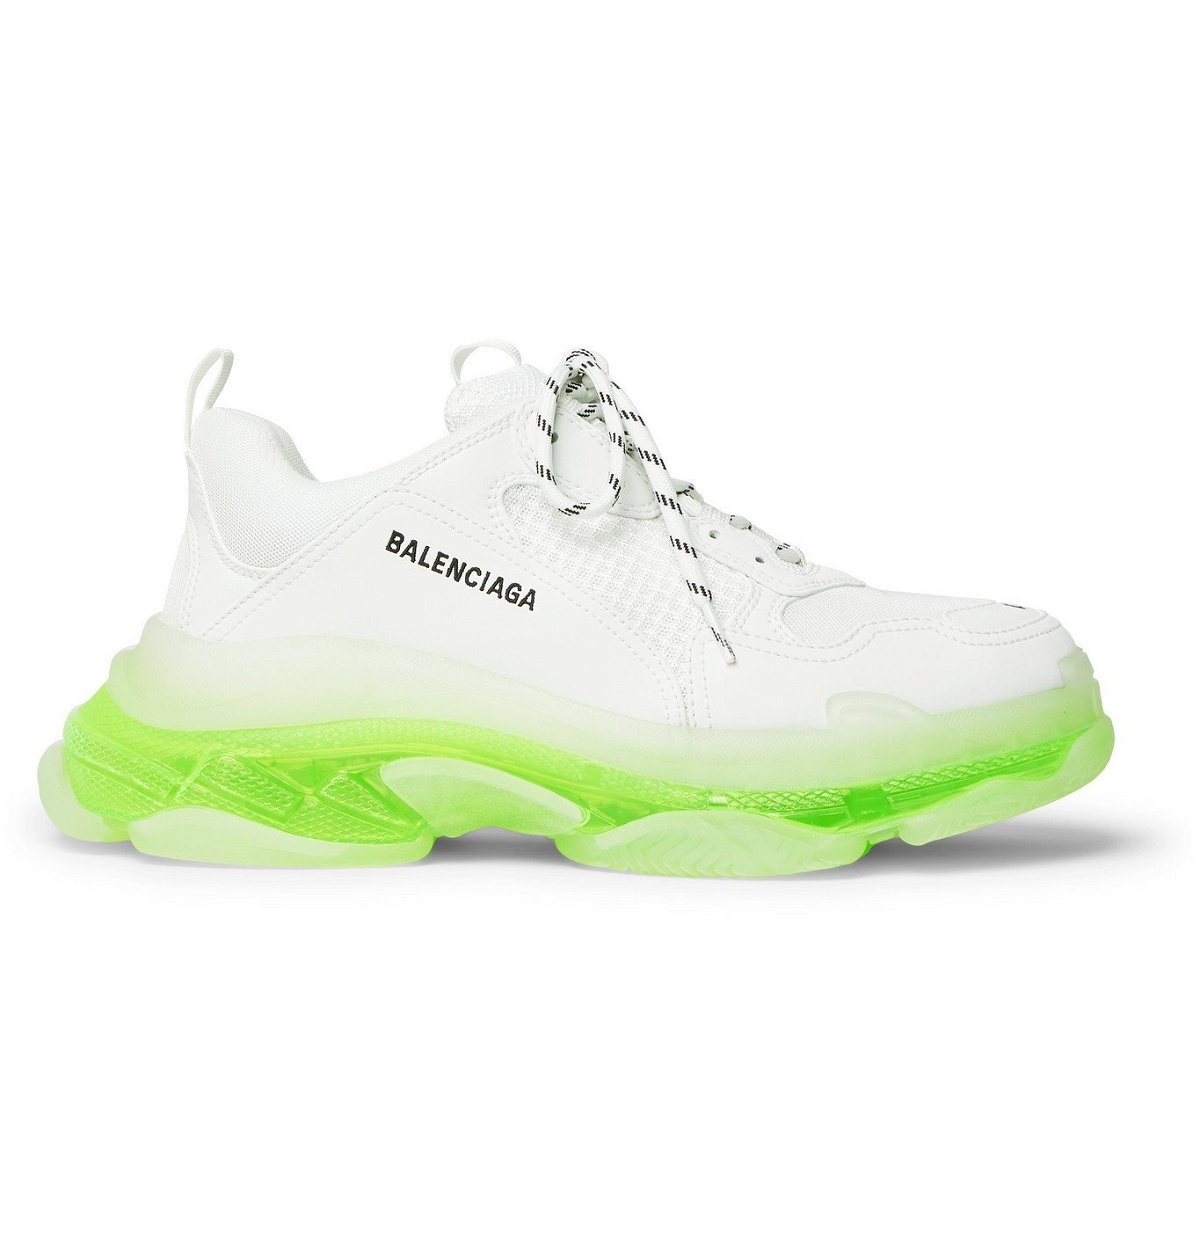 Balenciaga - Triple S Clear Sole Mesh and Leather Sneakers - White 